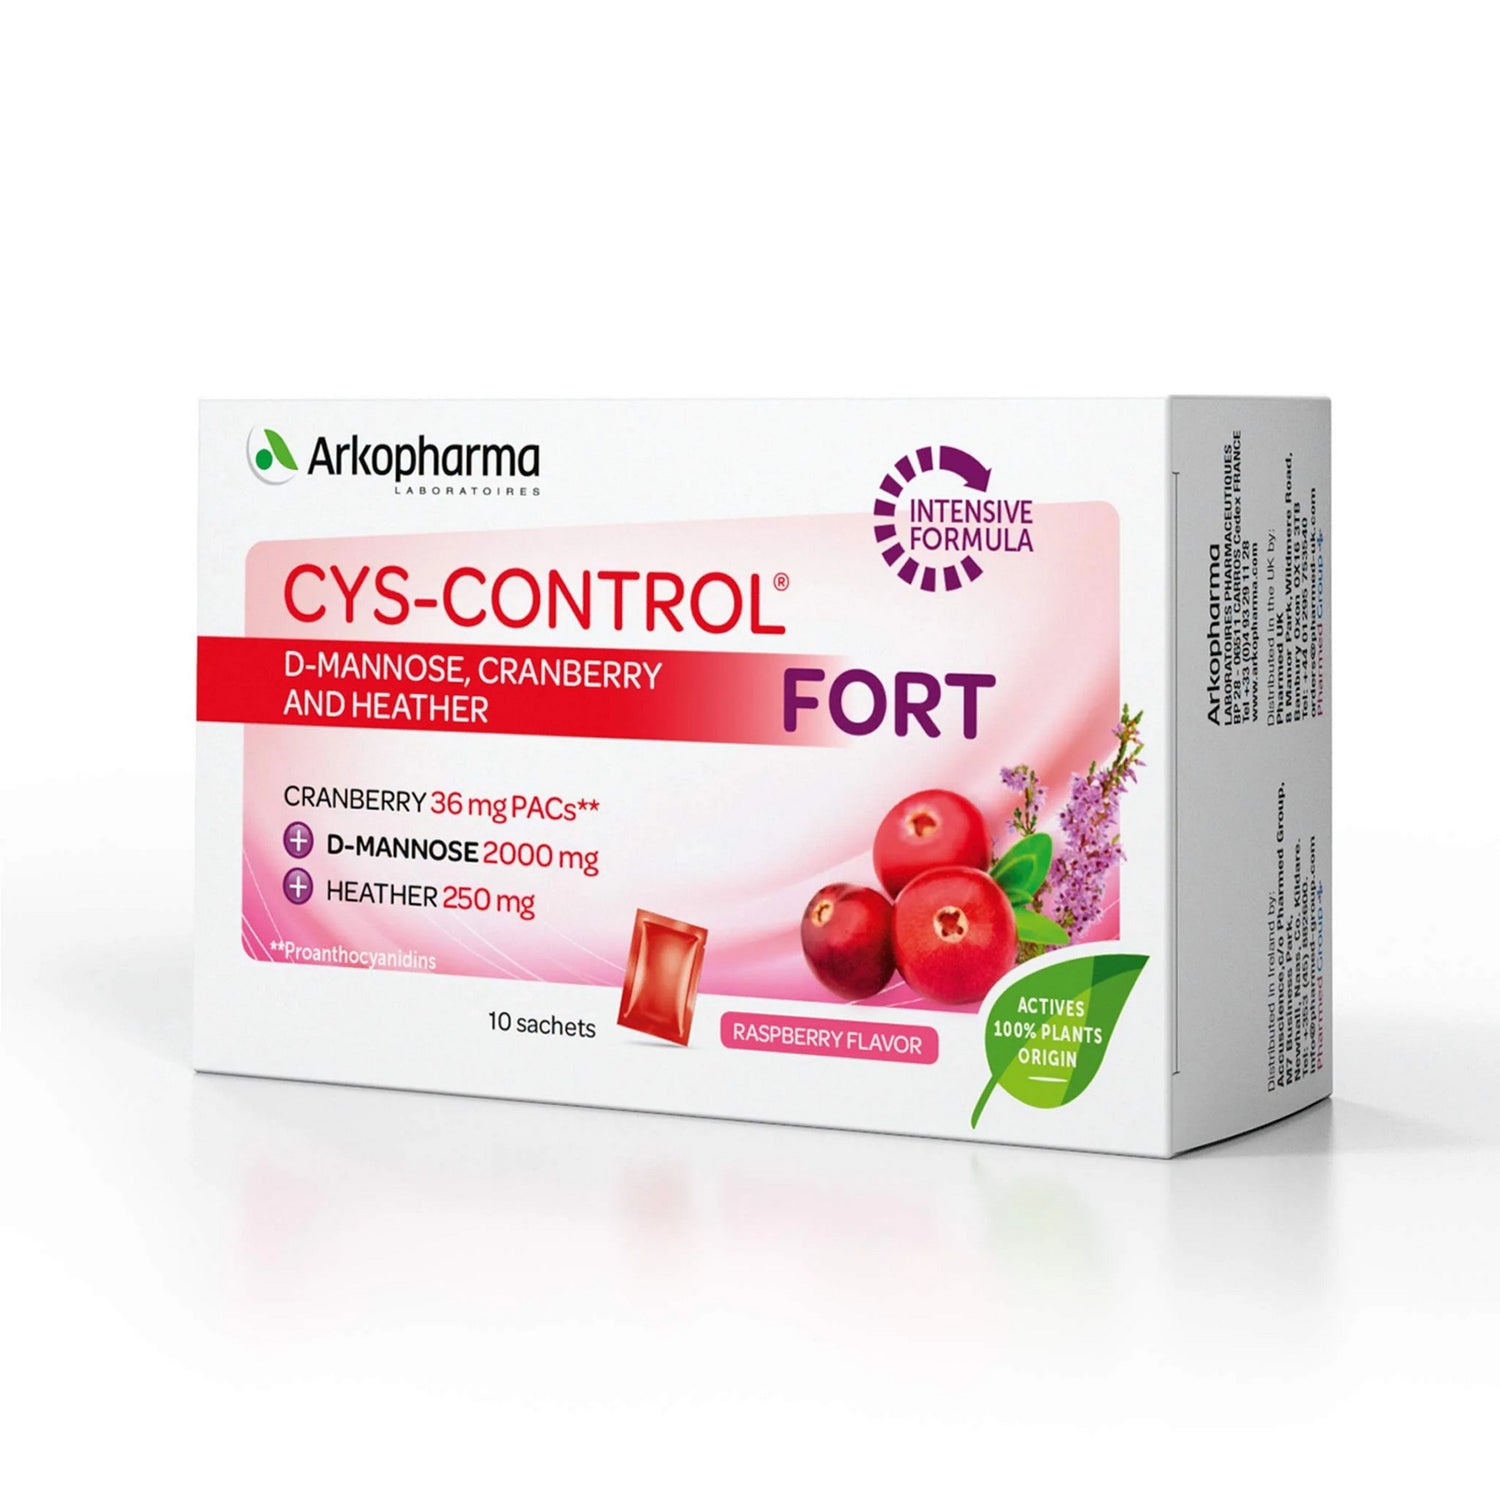 Cys-Control Fort 10S